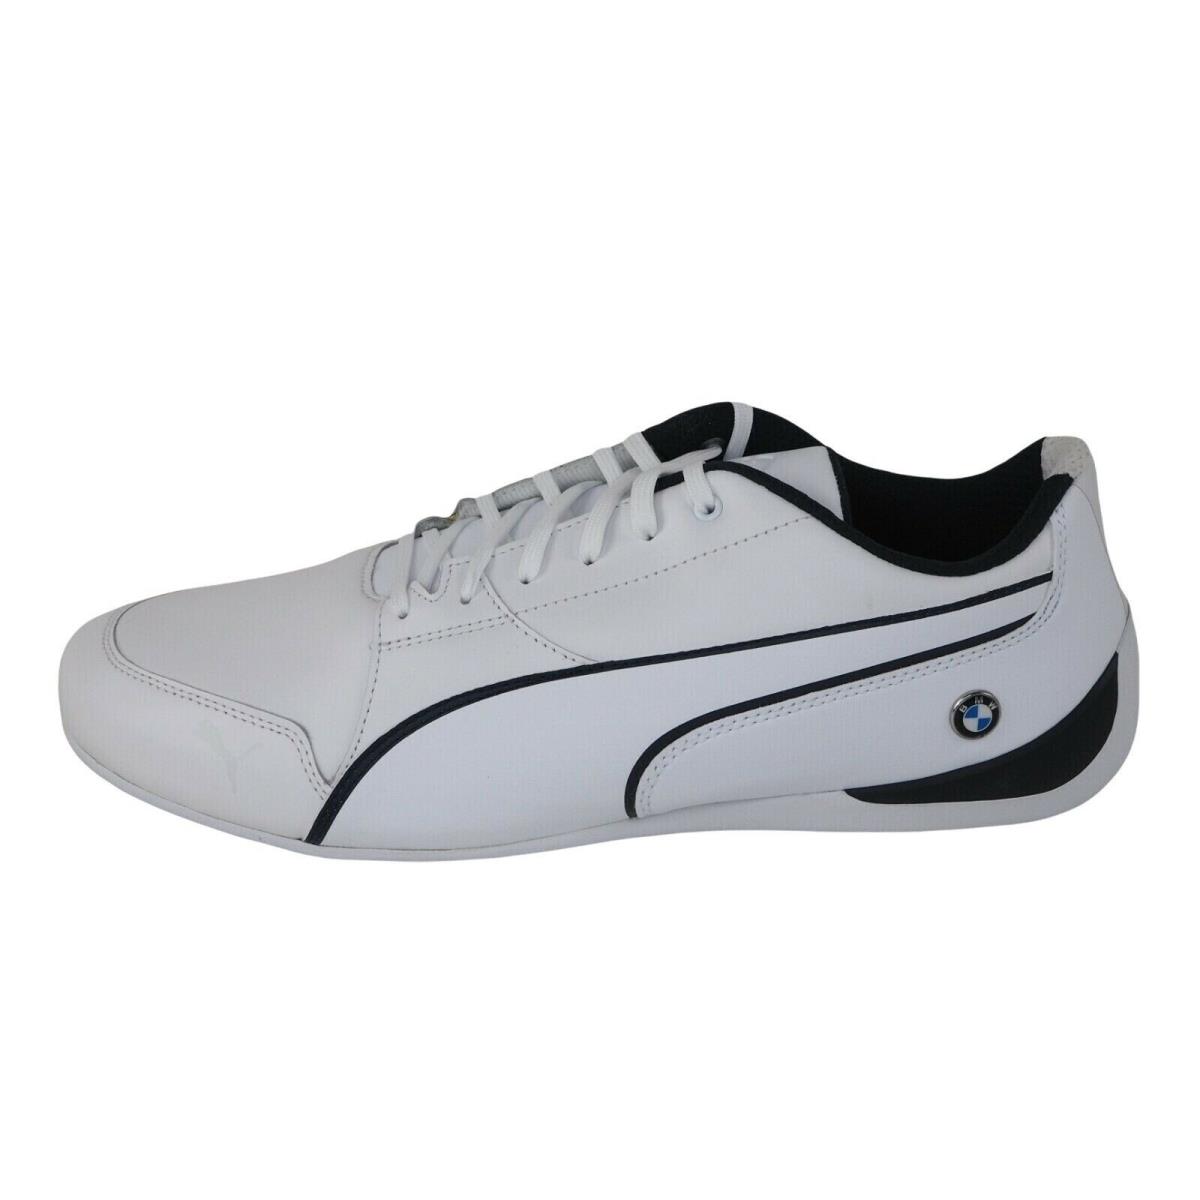 Puma Bmw MS Drift Cat 7 Sneakers 305986 02 Men s Shoes Leather White Size 11